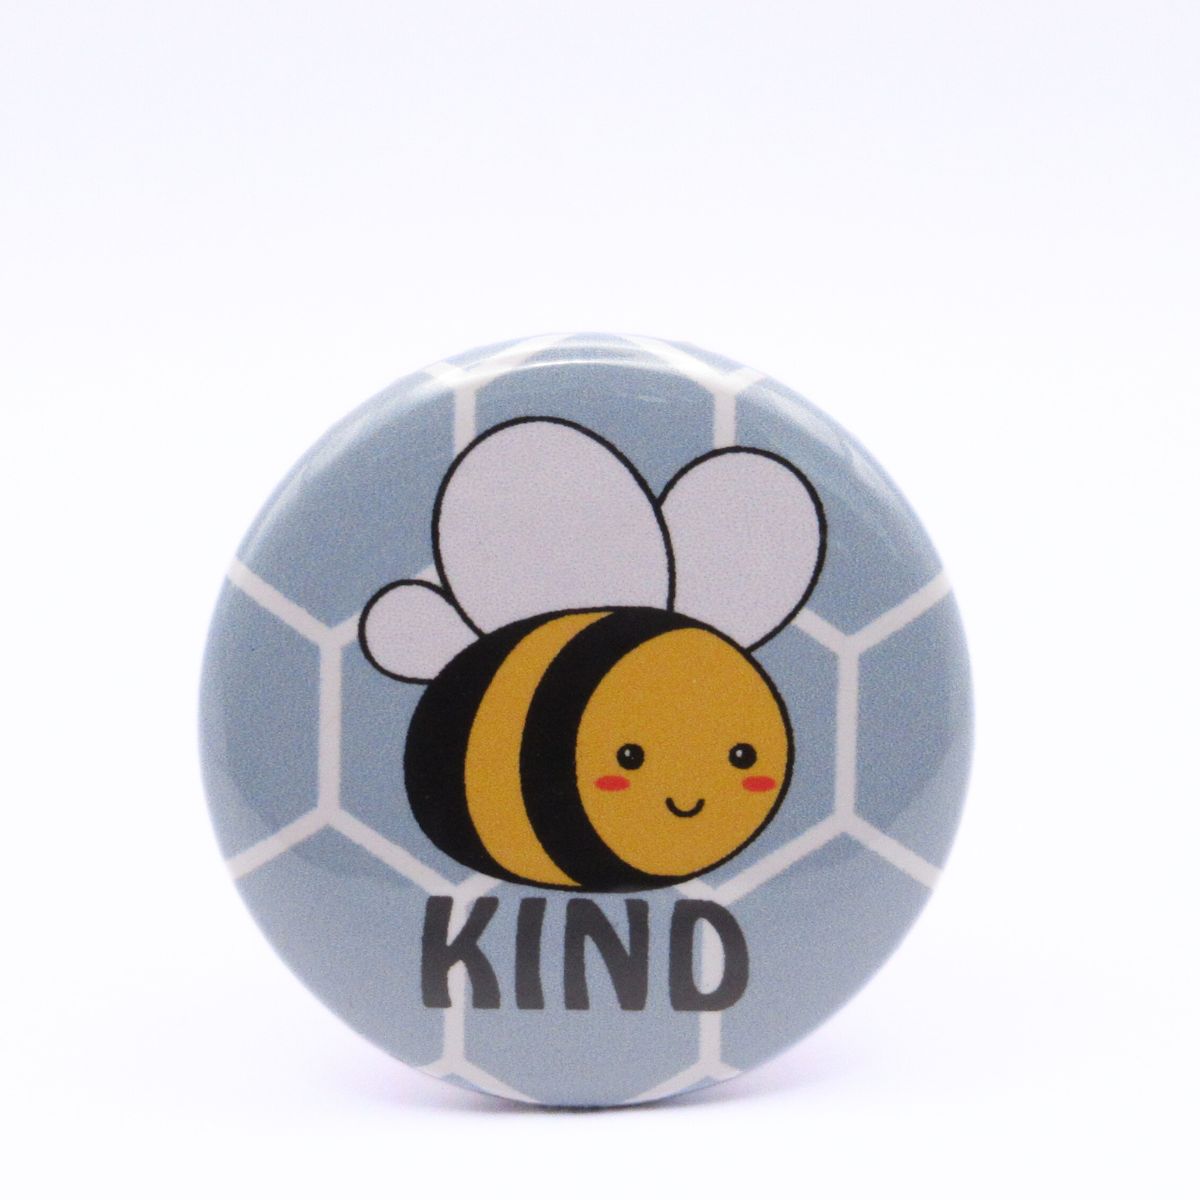 BooBooRoo Pinback Button (i.e. button, badge, pin) of a Cute Kawaii Style Bee with the pun Bee Kind.